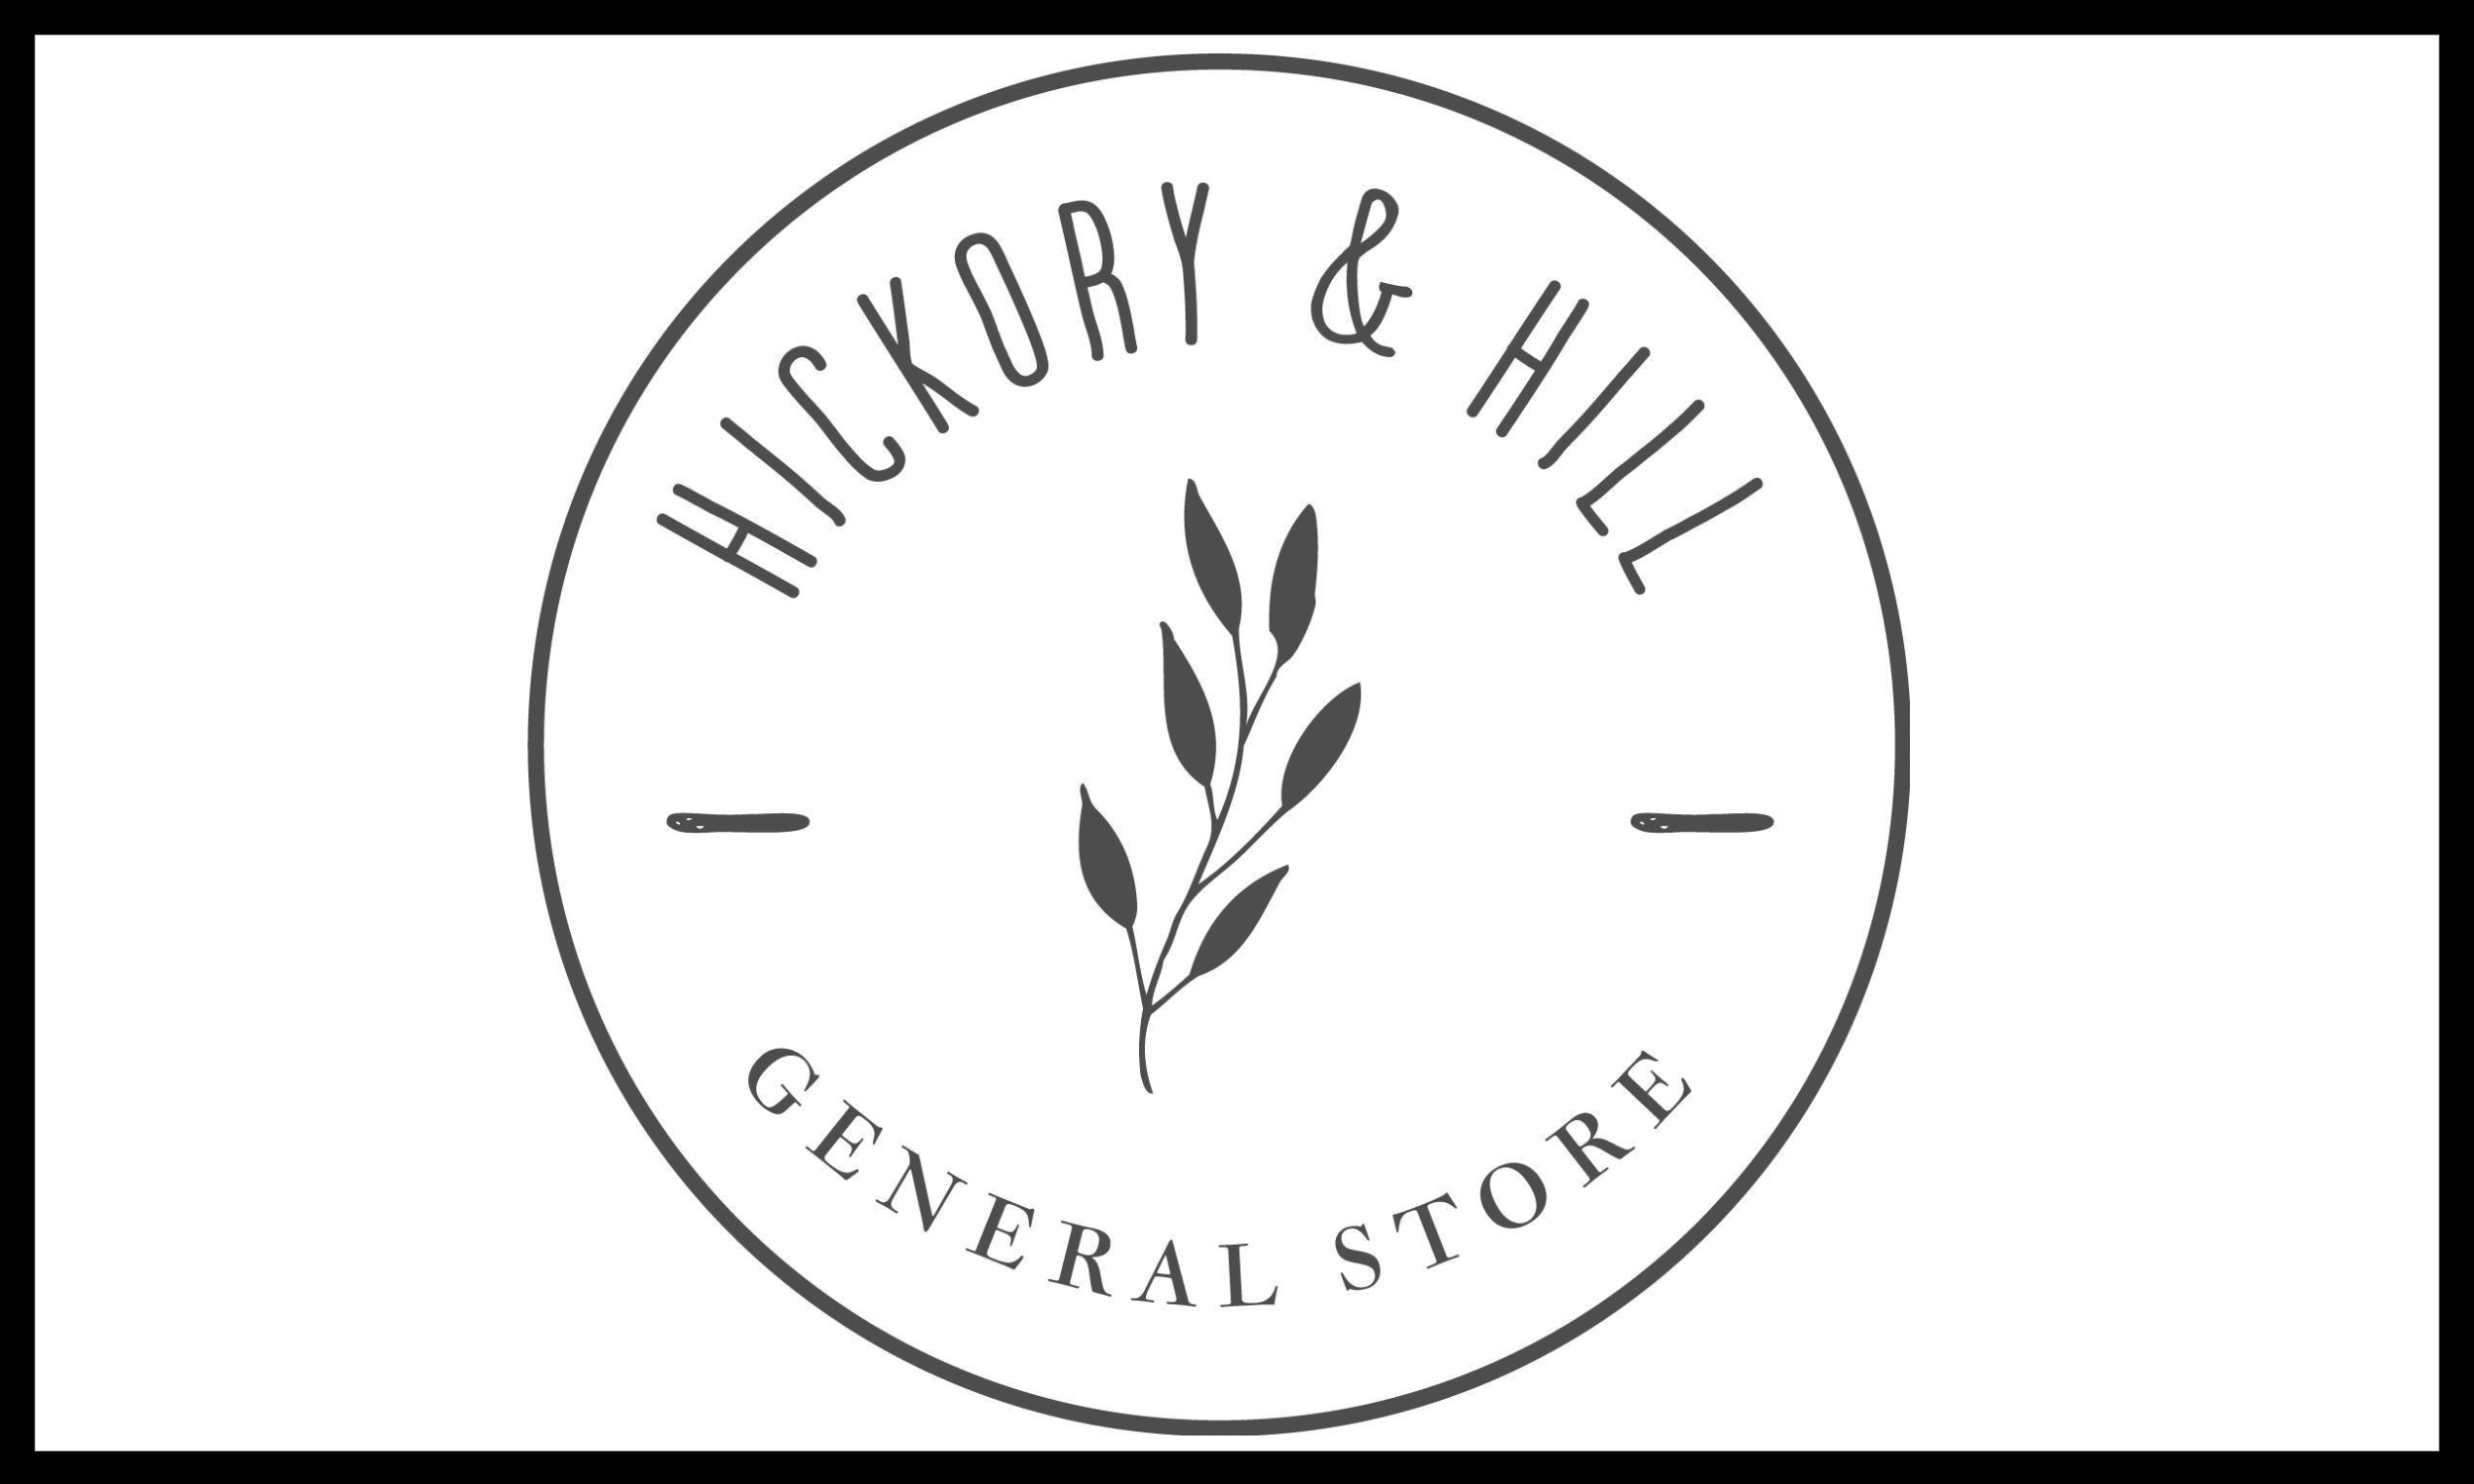 Hickory &amp; Hill General Store